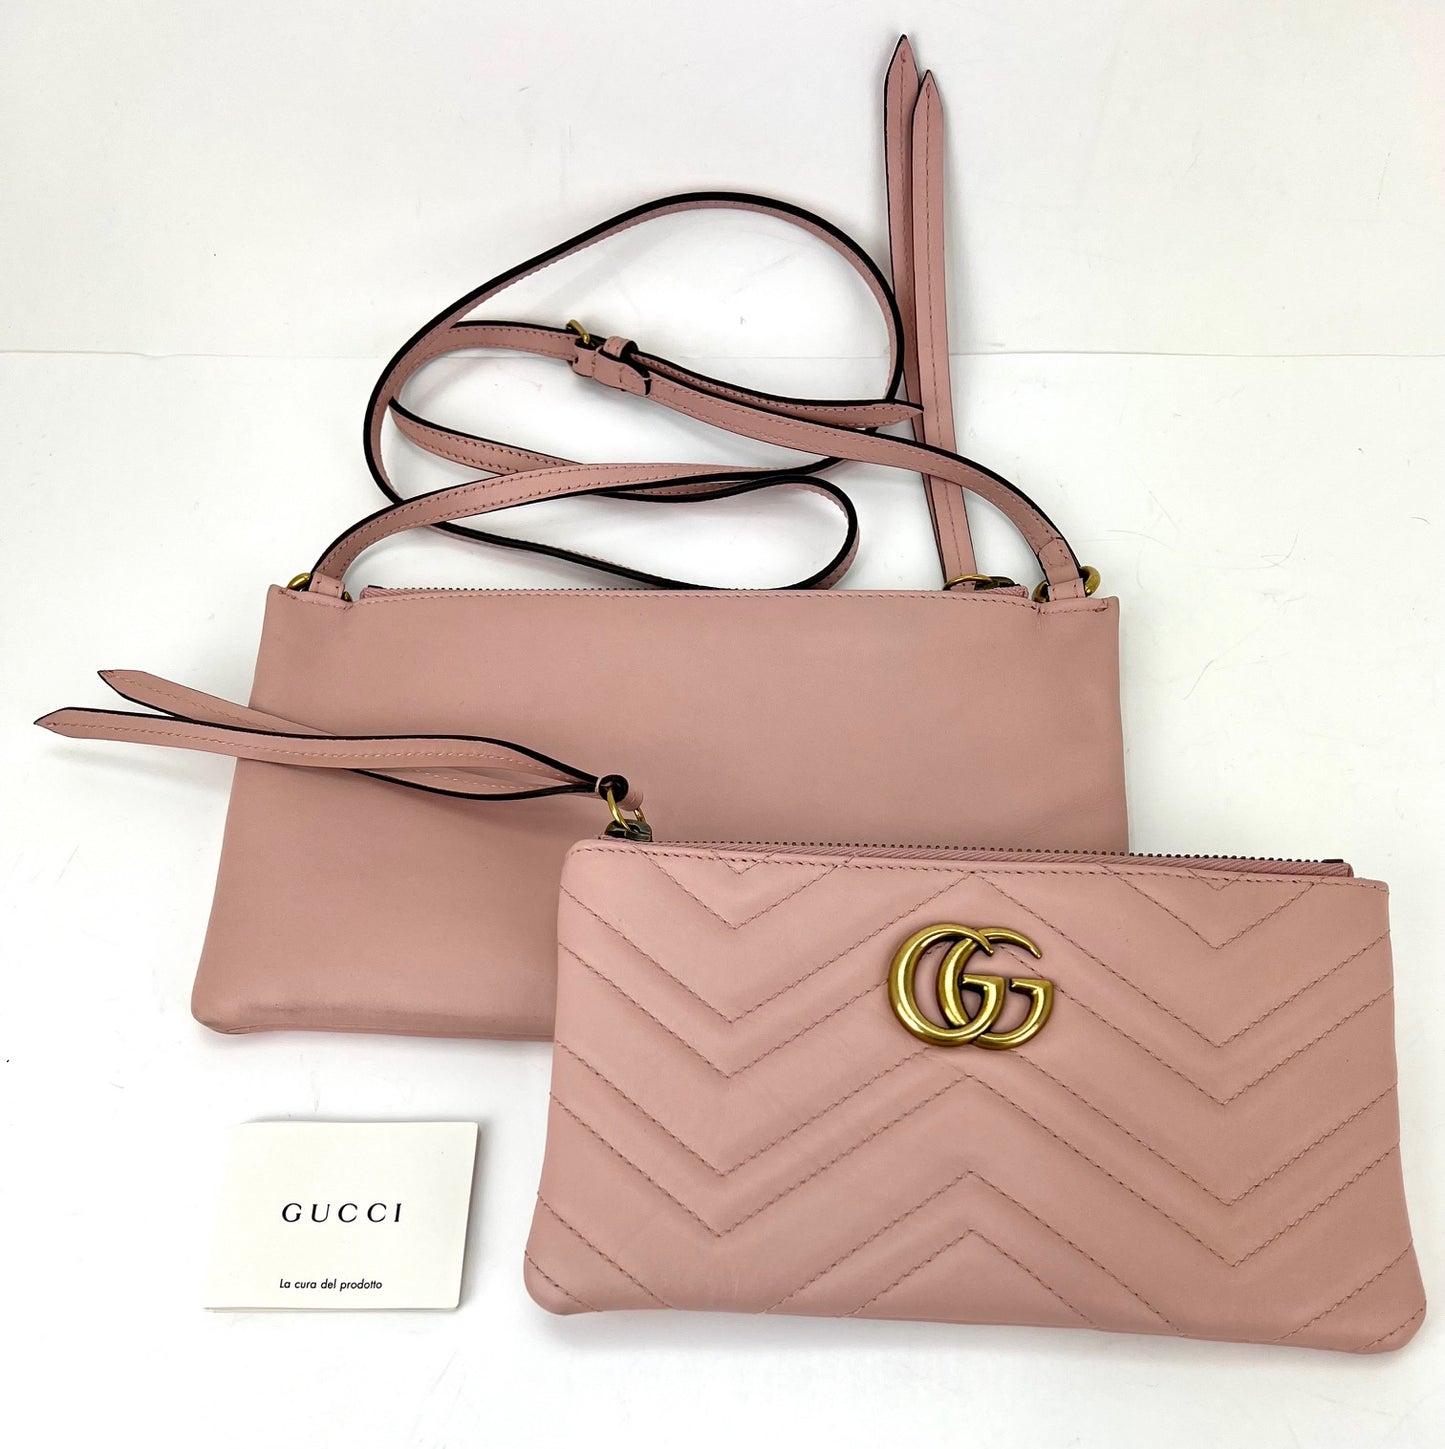 Gucci - Authenticated GG Marmont Chain Handbag - Leather Beige Plain for Women, Never Worn